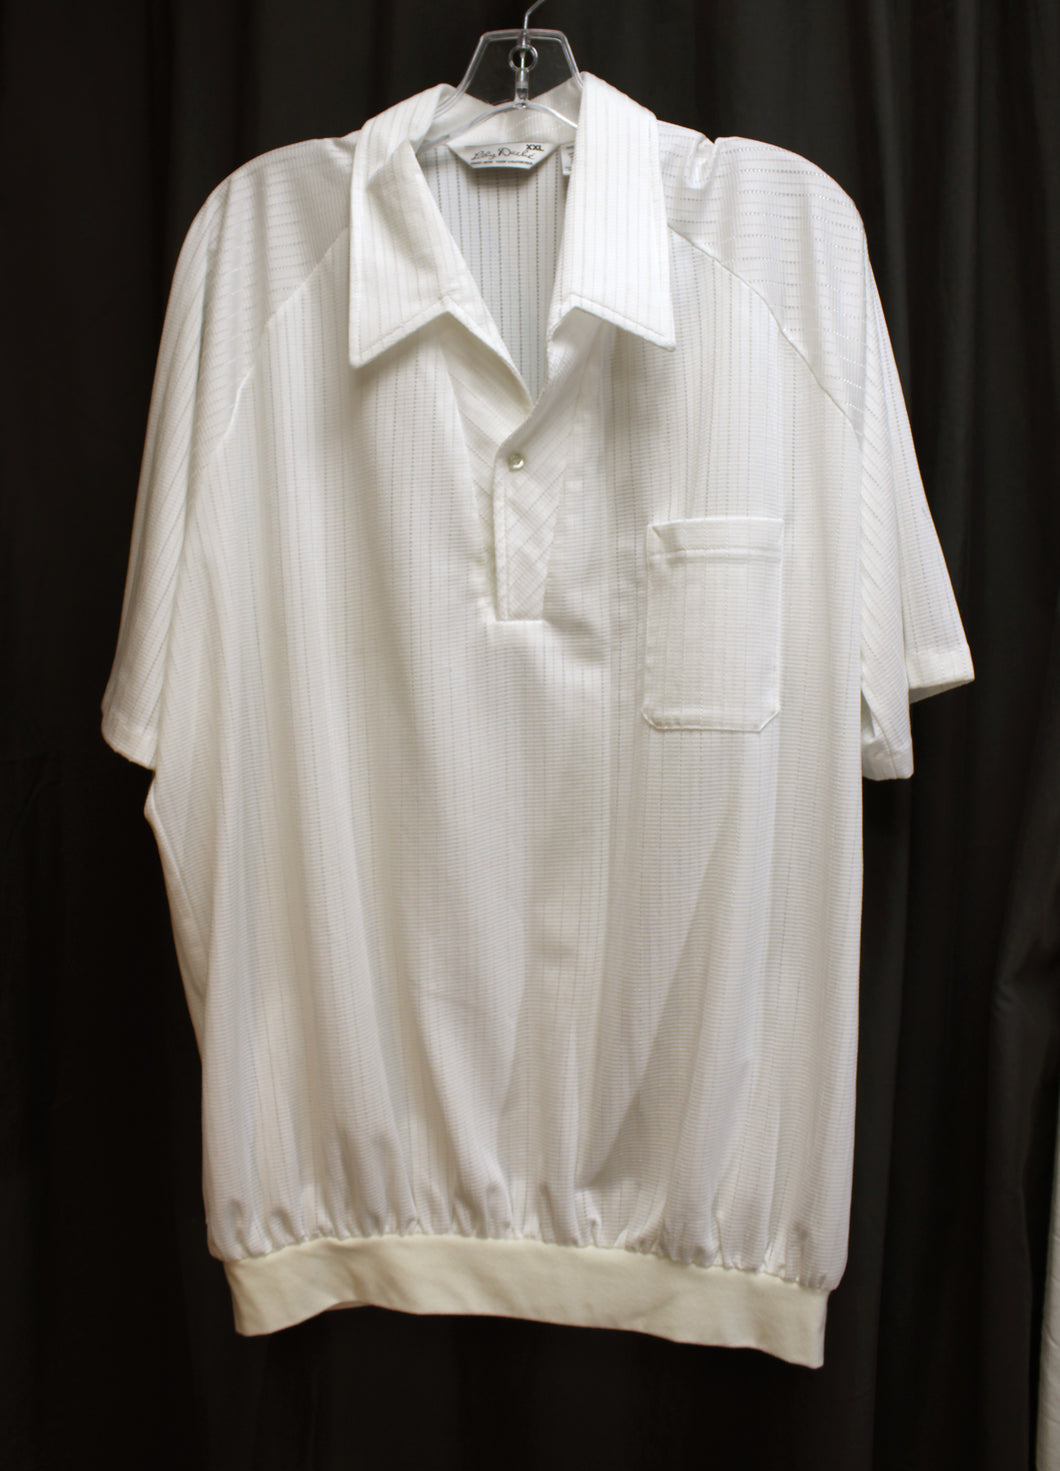 Men's Vintage- Lilly Dache - White Perforated V-Neck Collared Shirt w/ Waist Band - Size XXL